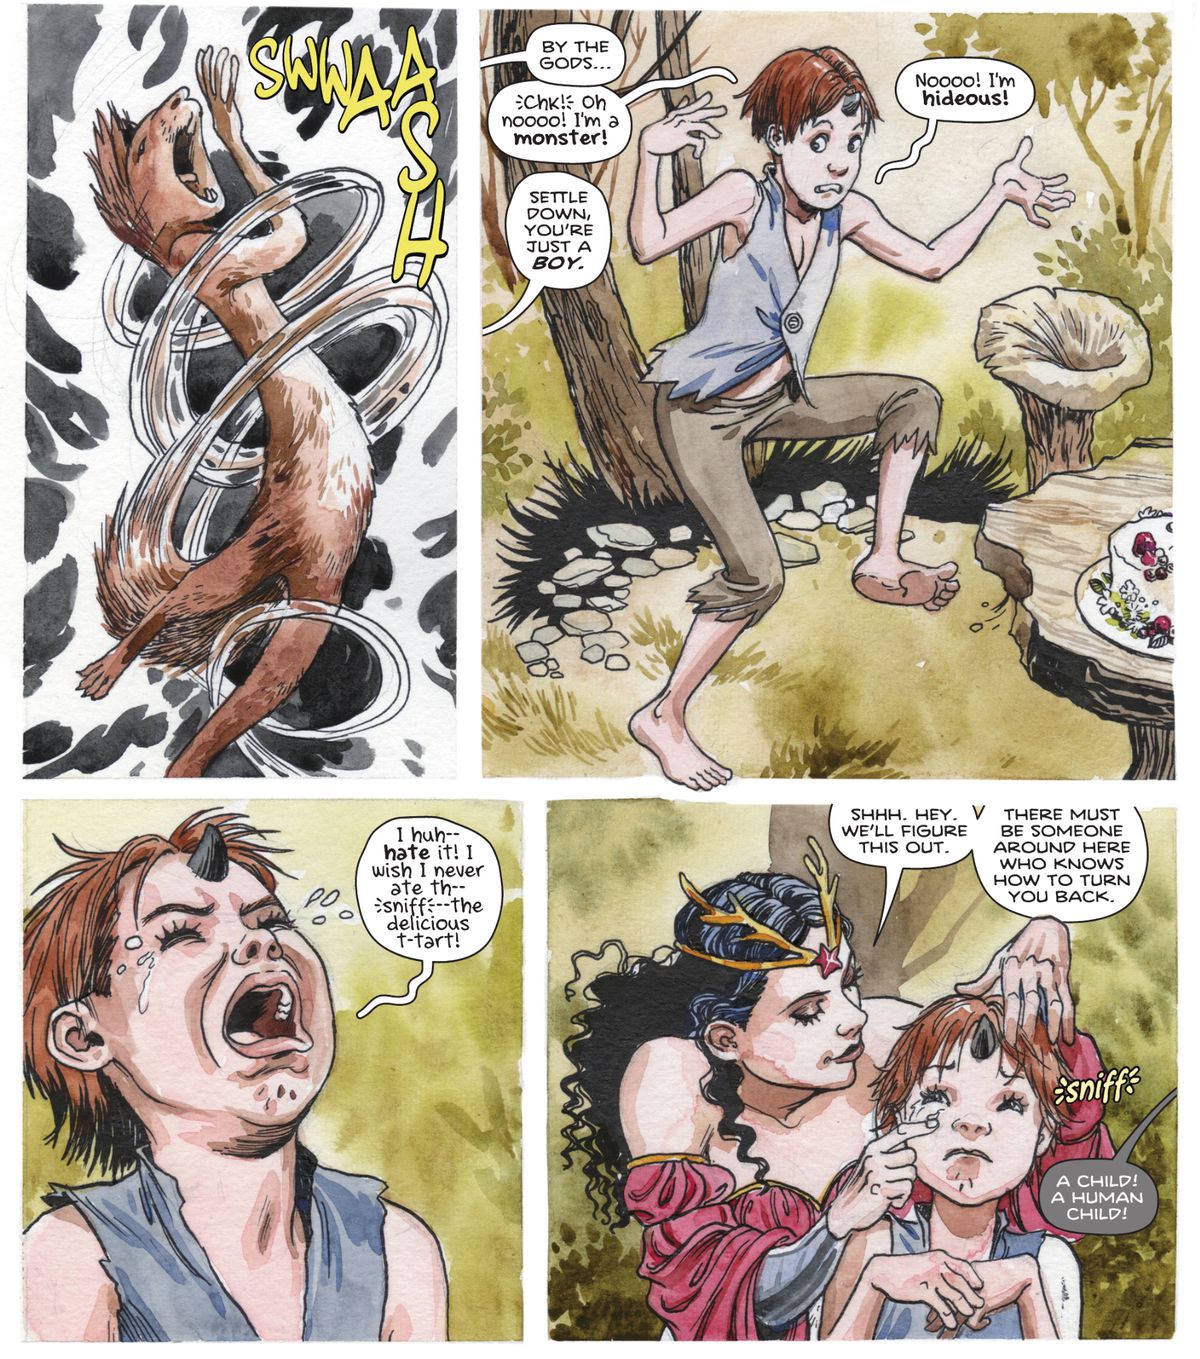 Squirrel god Ratatoskr bawls petulantly after being transformed into a young human boy. “Settle down,” Wonder Woman tells him, “YOu’re just a boy. “Nooooo!,” he wails, “I’m hideous!” in Wonder Woman #776 (2021). 